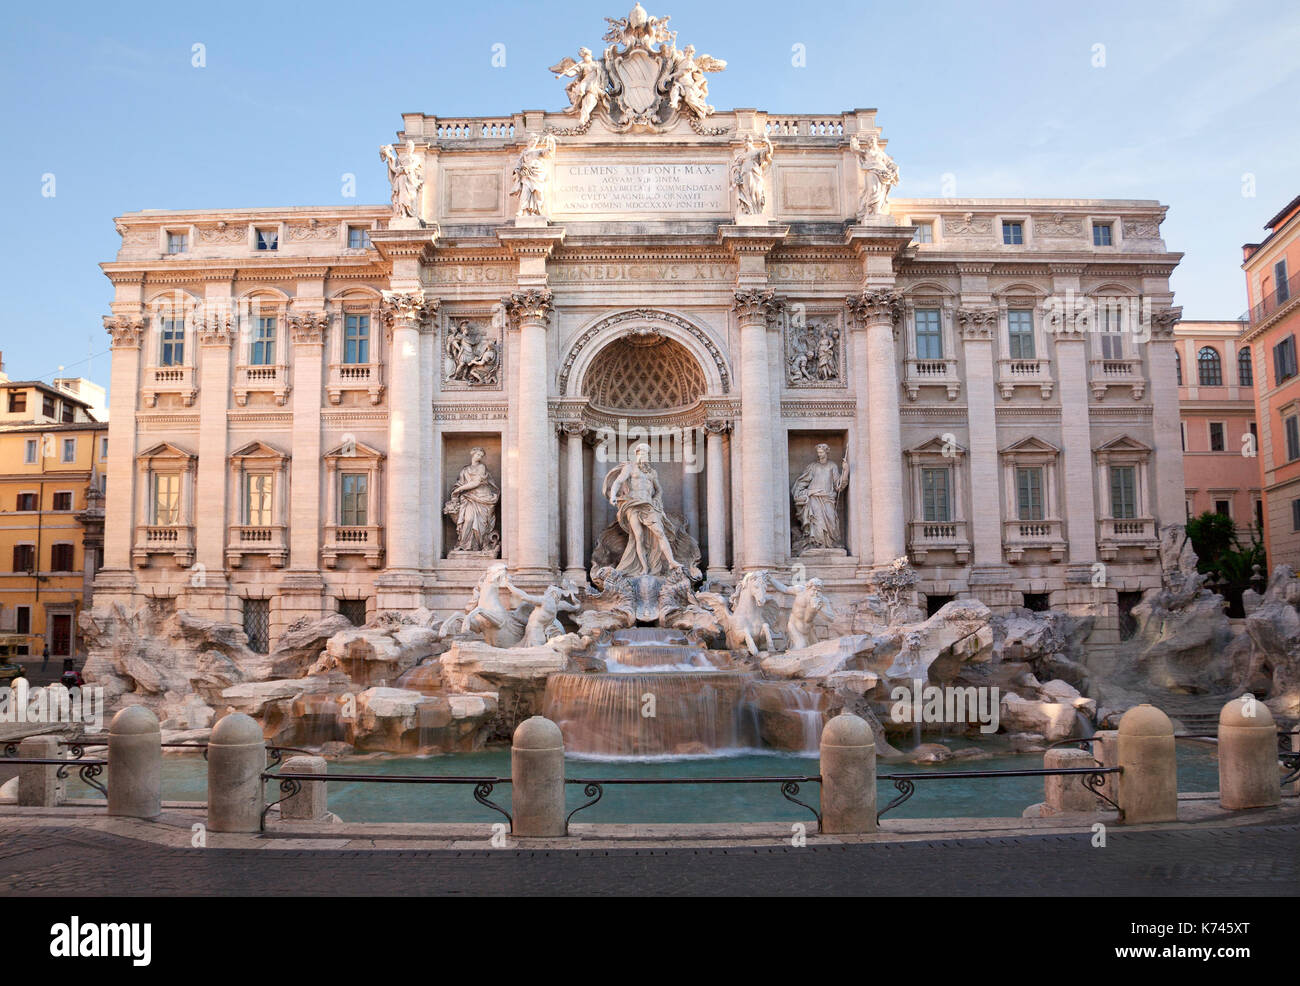 Trevi Fountain, Rome, Italy, Piazza di Trevi, Europe, Famous Place Stock Photo